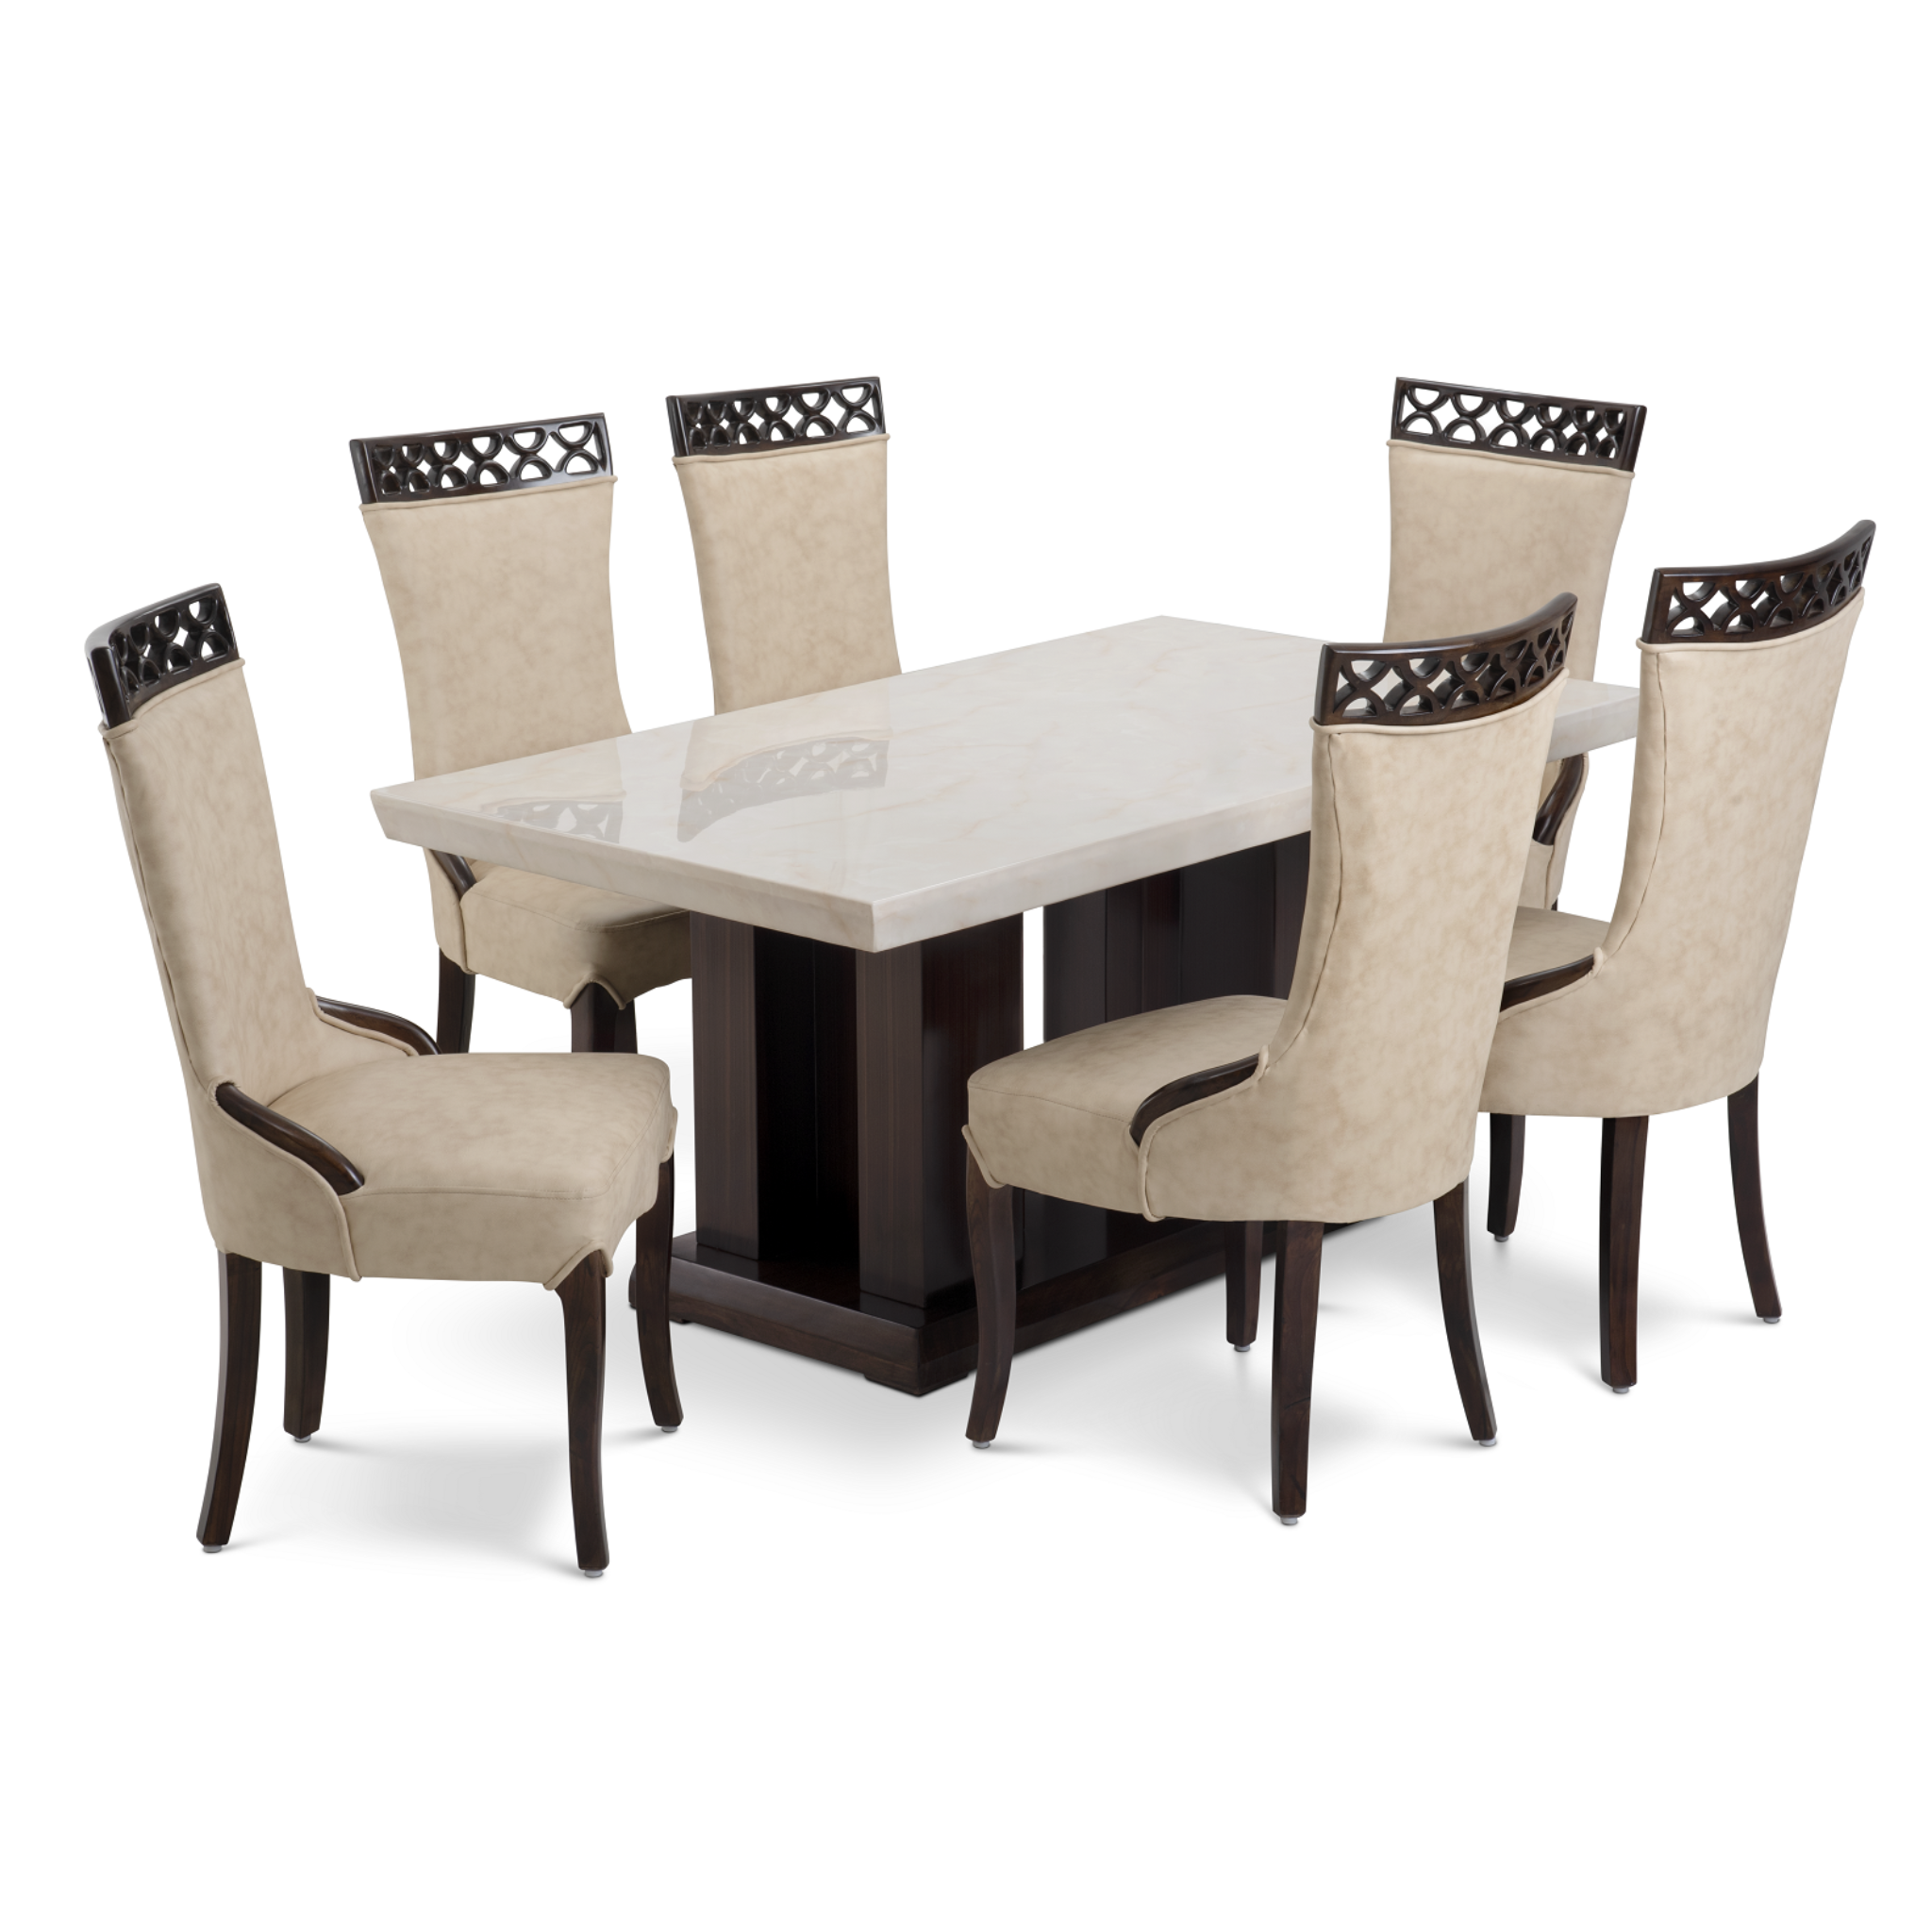 Kronos Dining Table with Chair